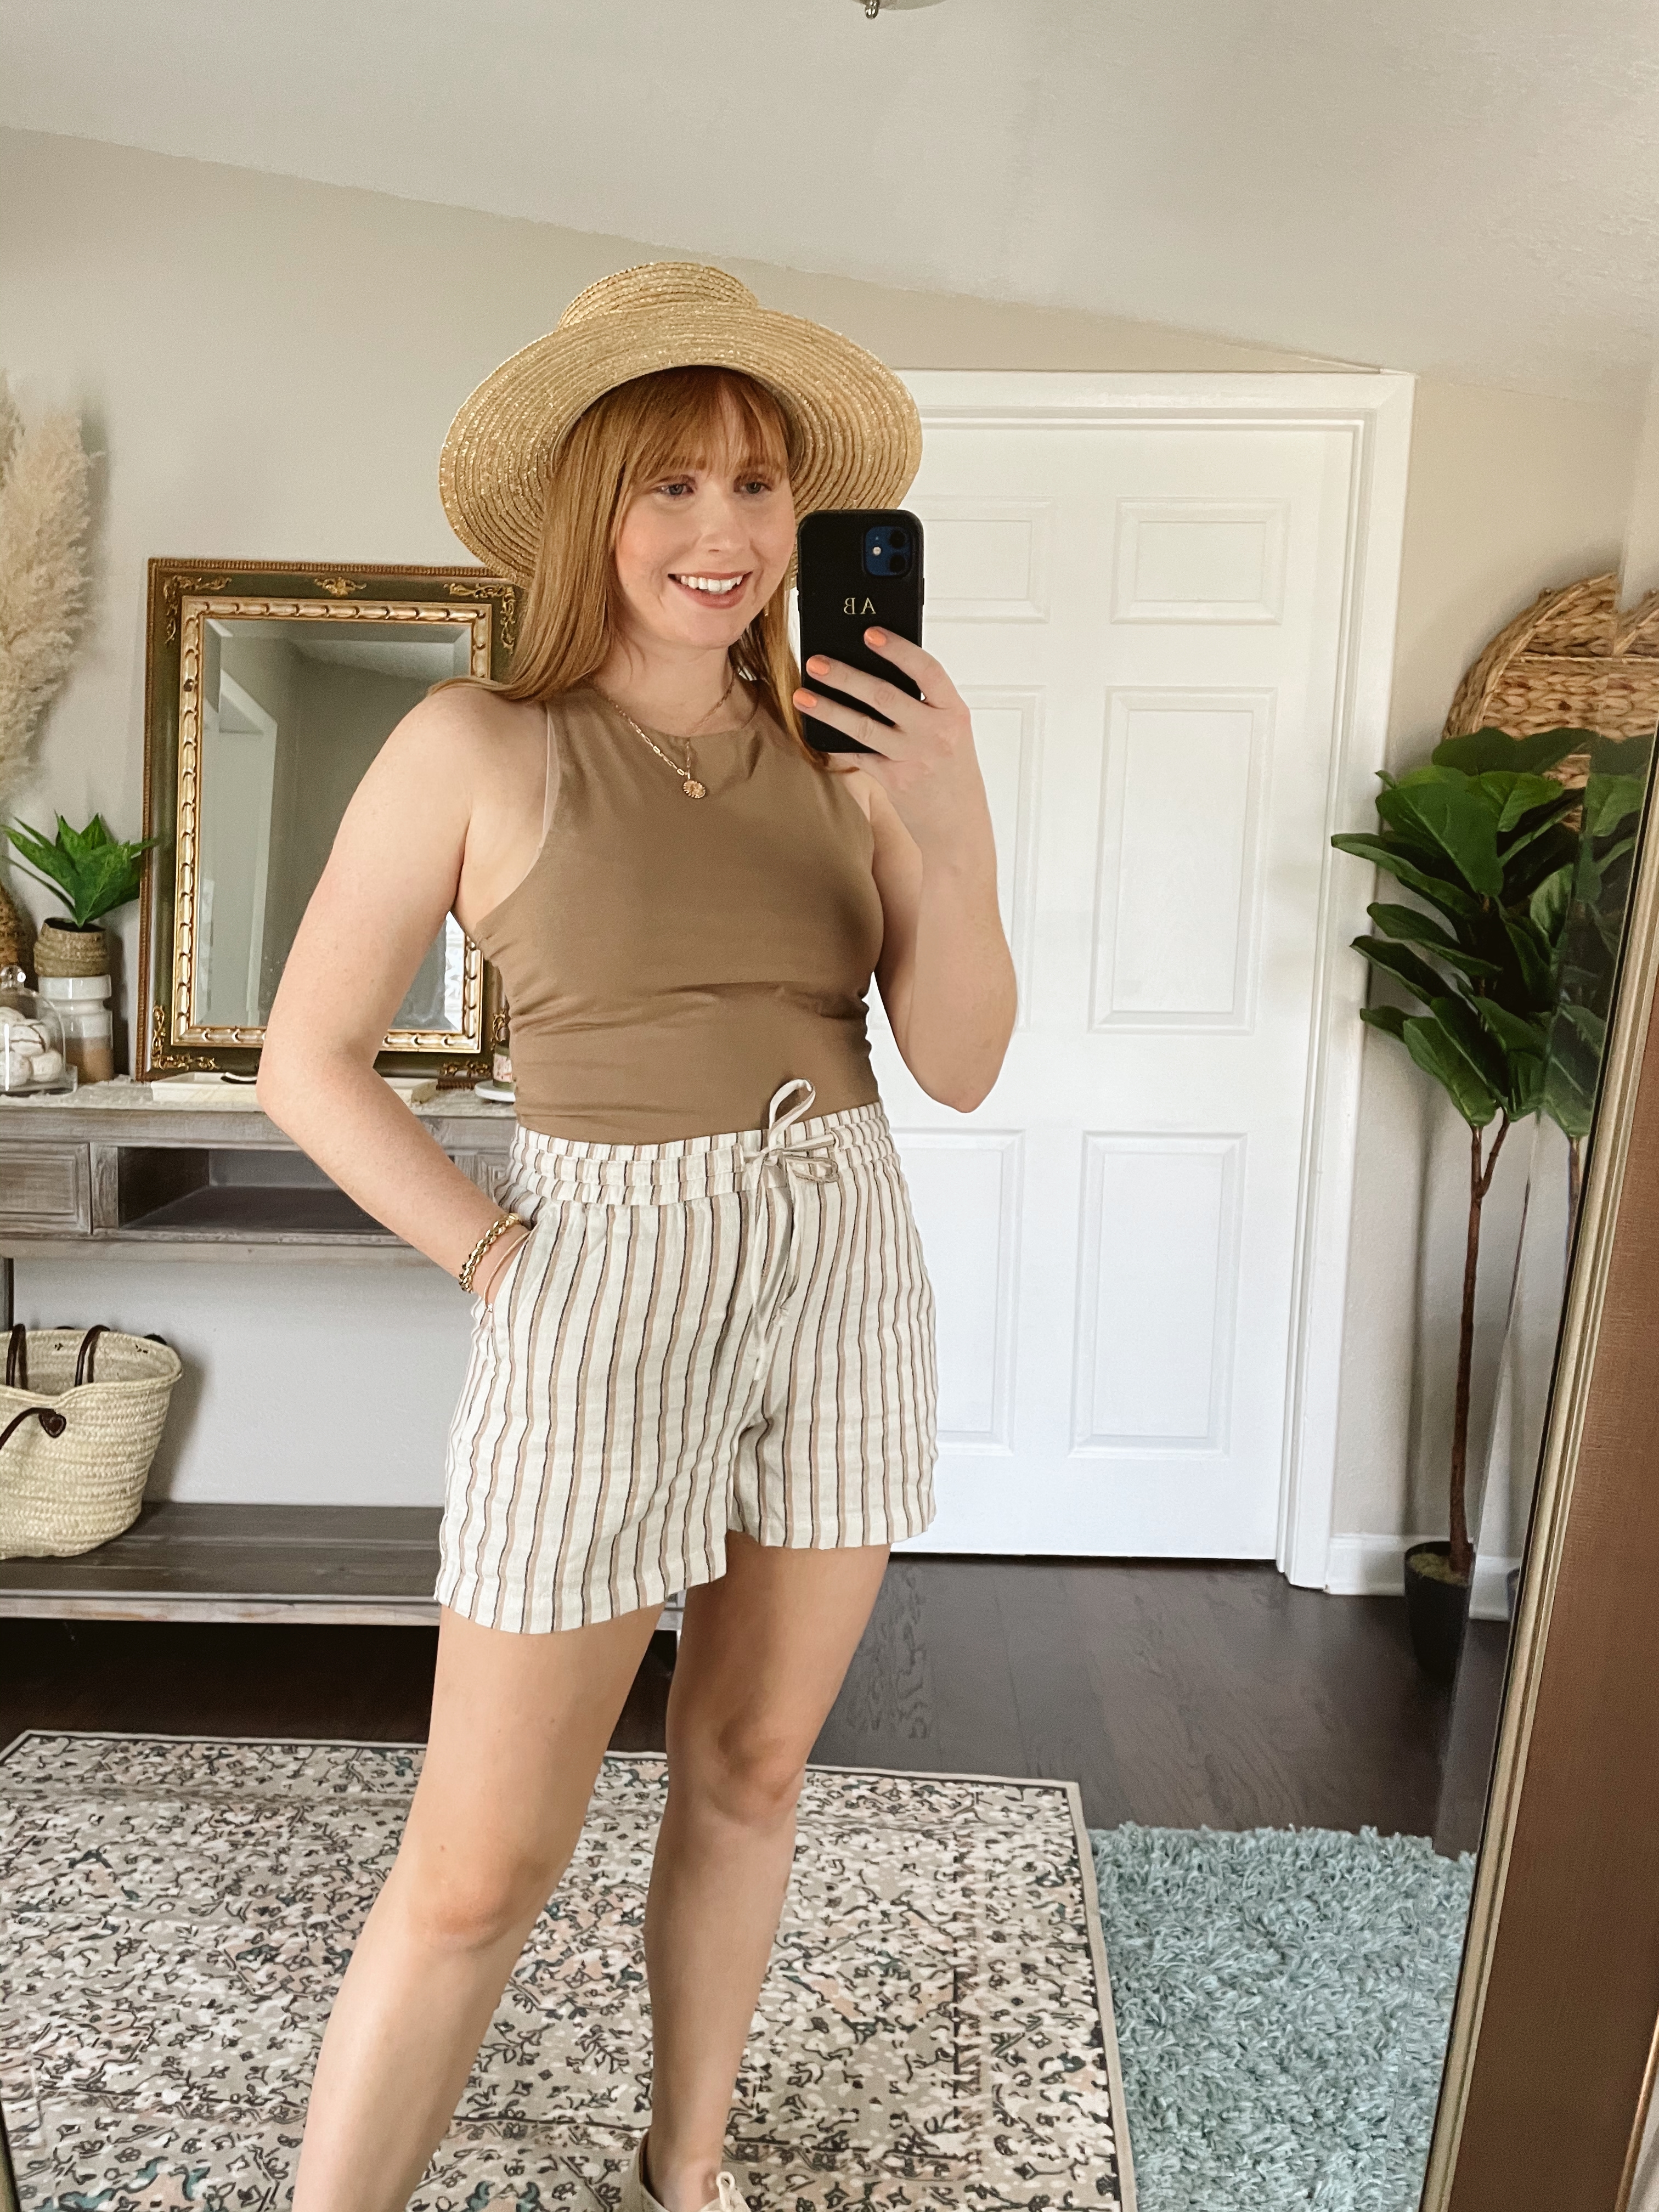 Outfit Idea - Summer Vacation - What To Wear In Hot Weather and Humidity - Summer 2021